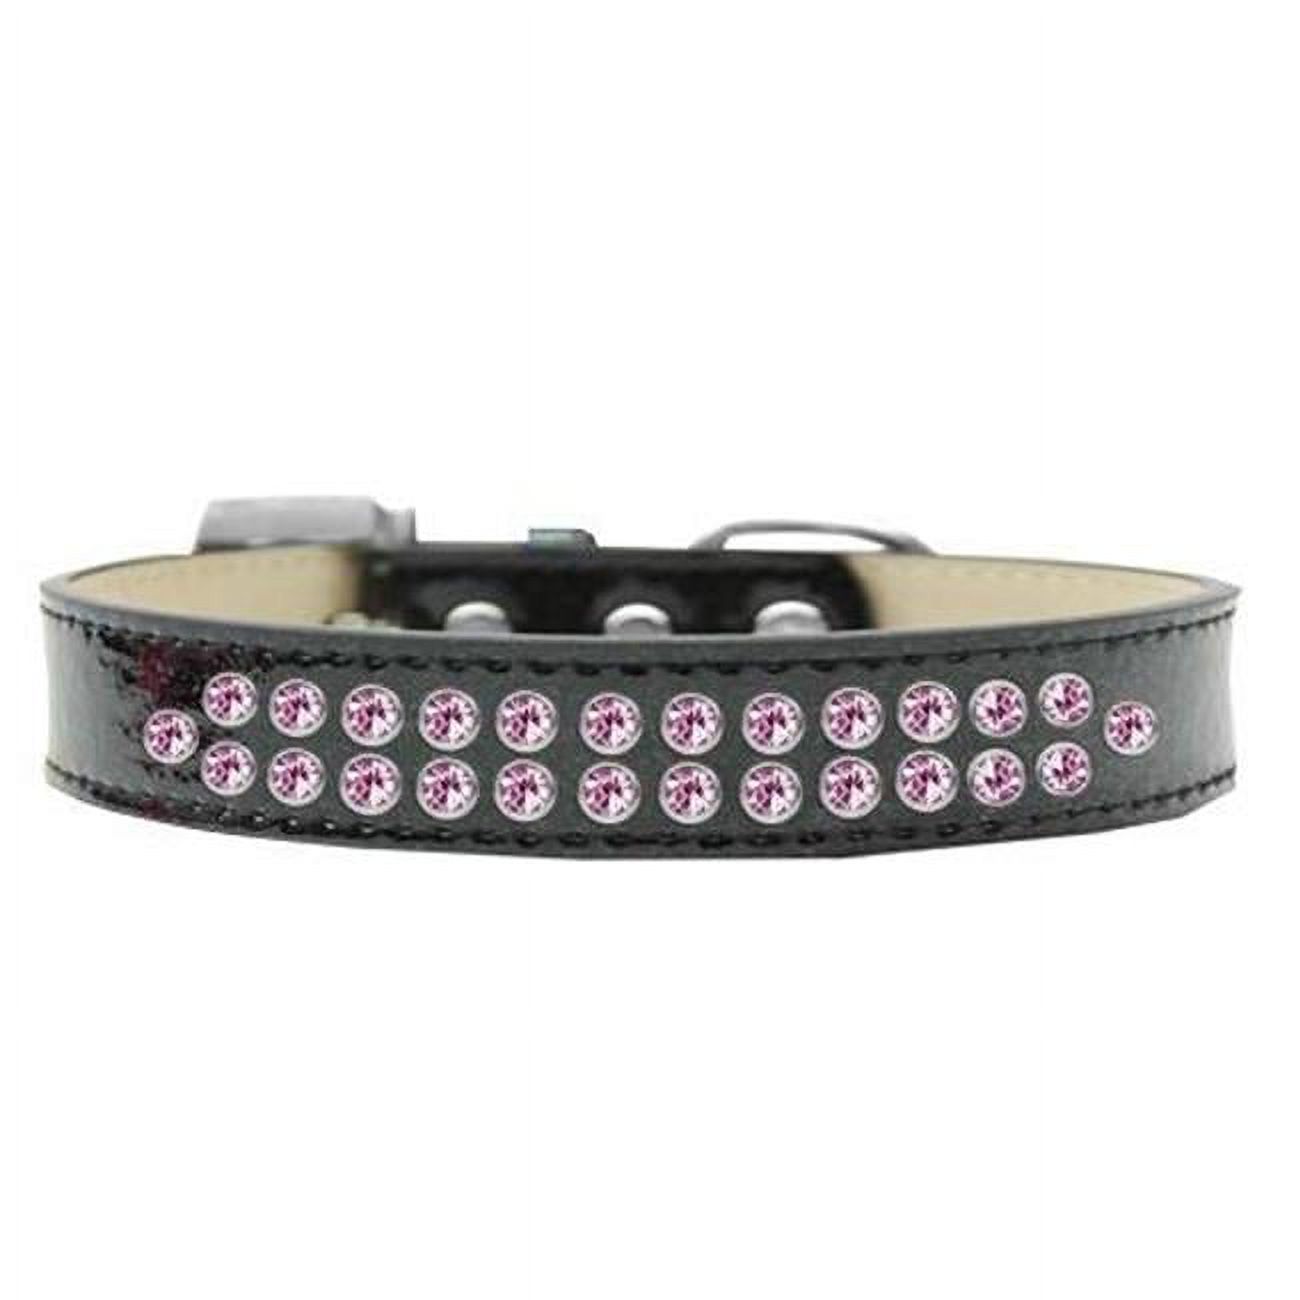 Mirage Pet Products614-06 BK-12 Two Row Light Pink Crystal Dog Collar, Black Ice Cream - Size 12 - image 1 of 5